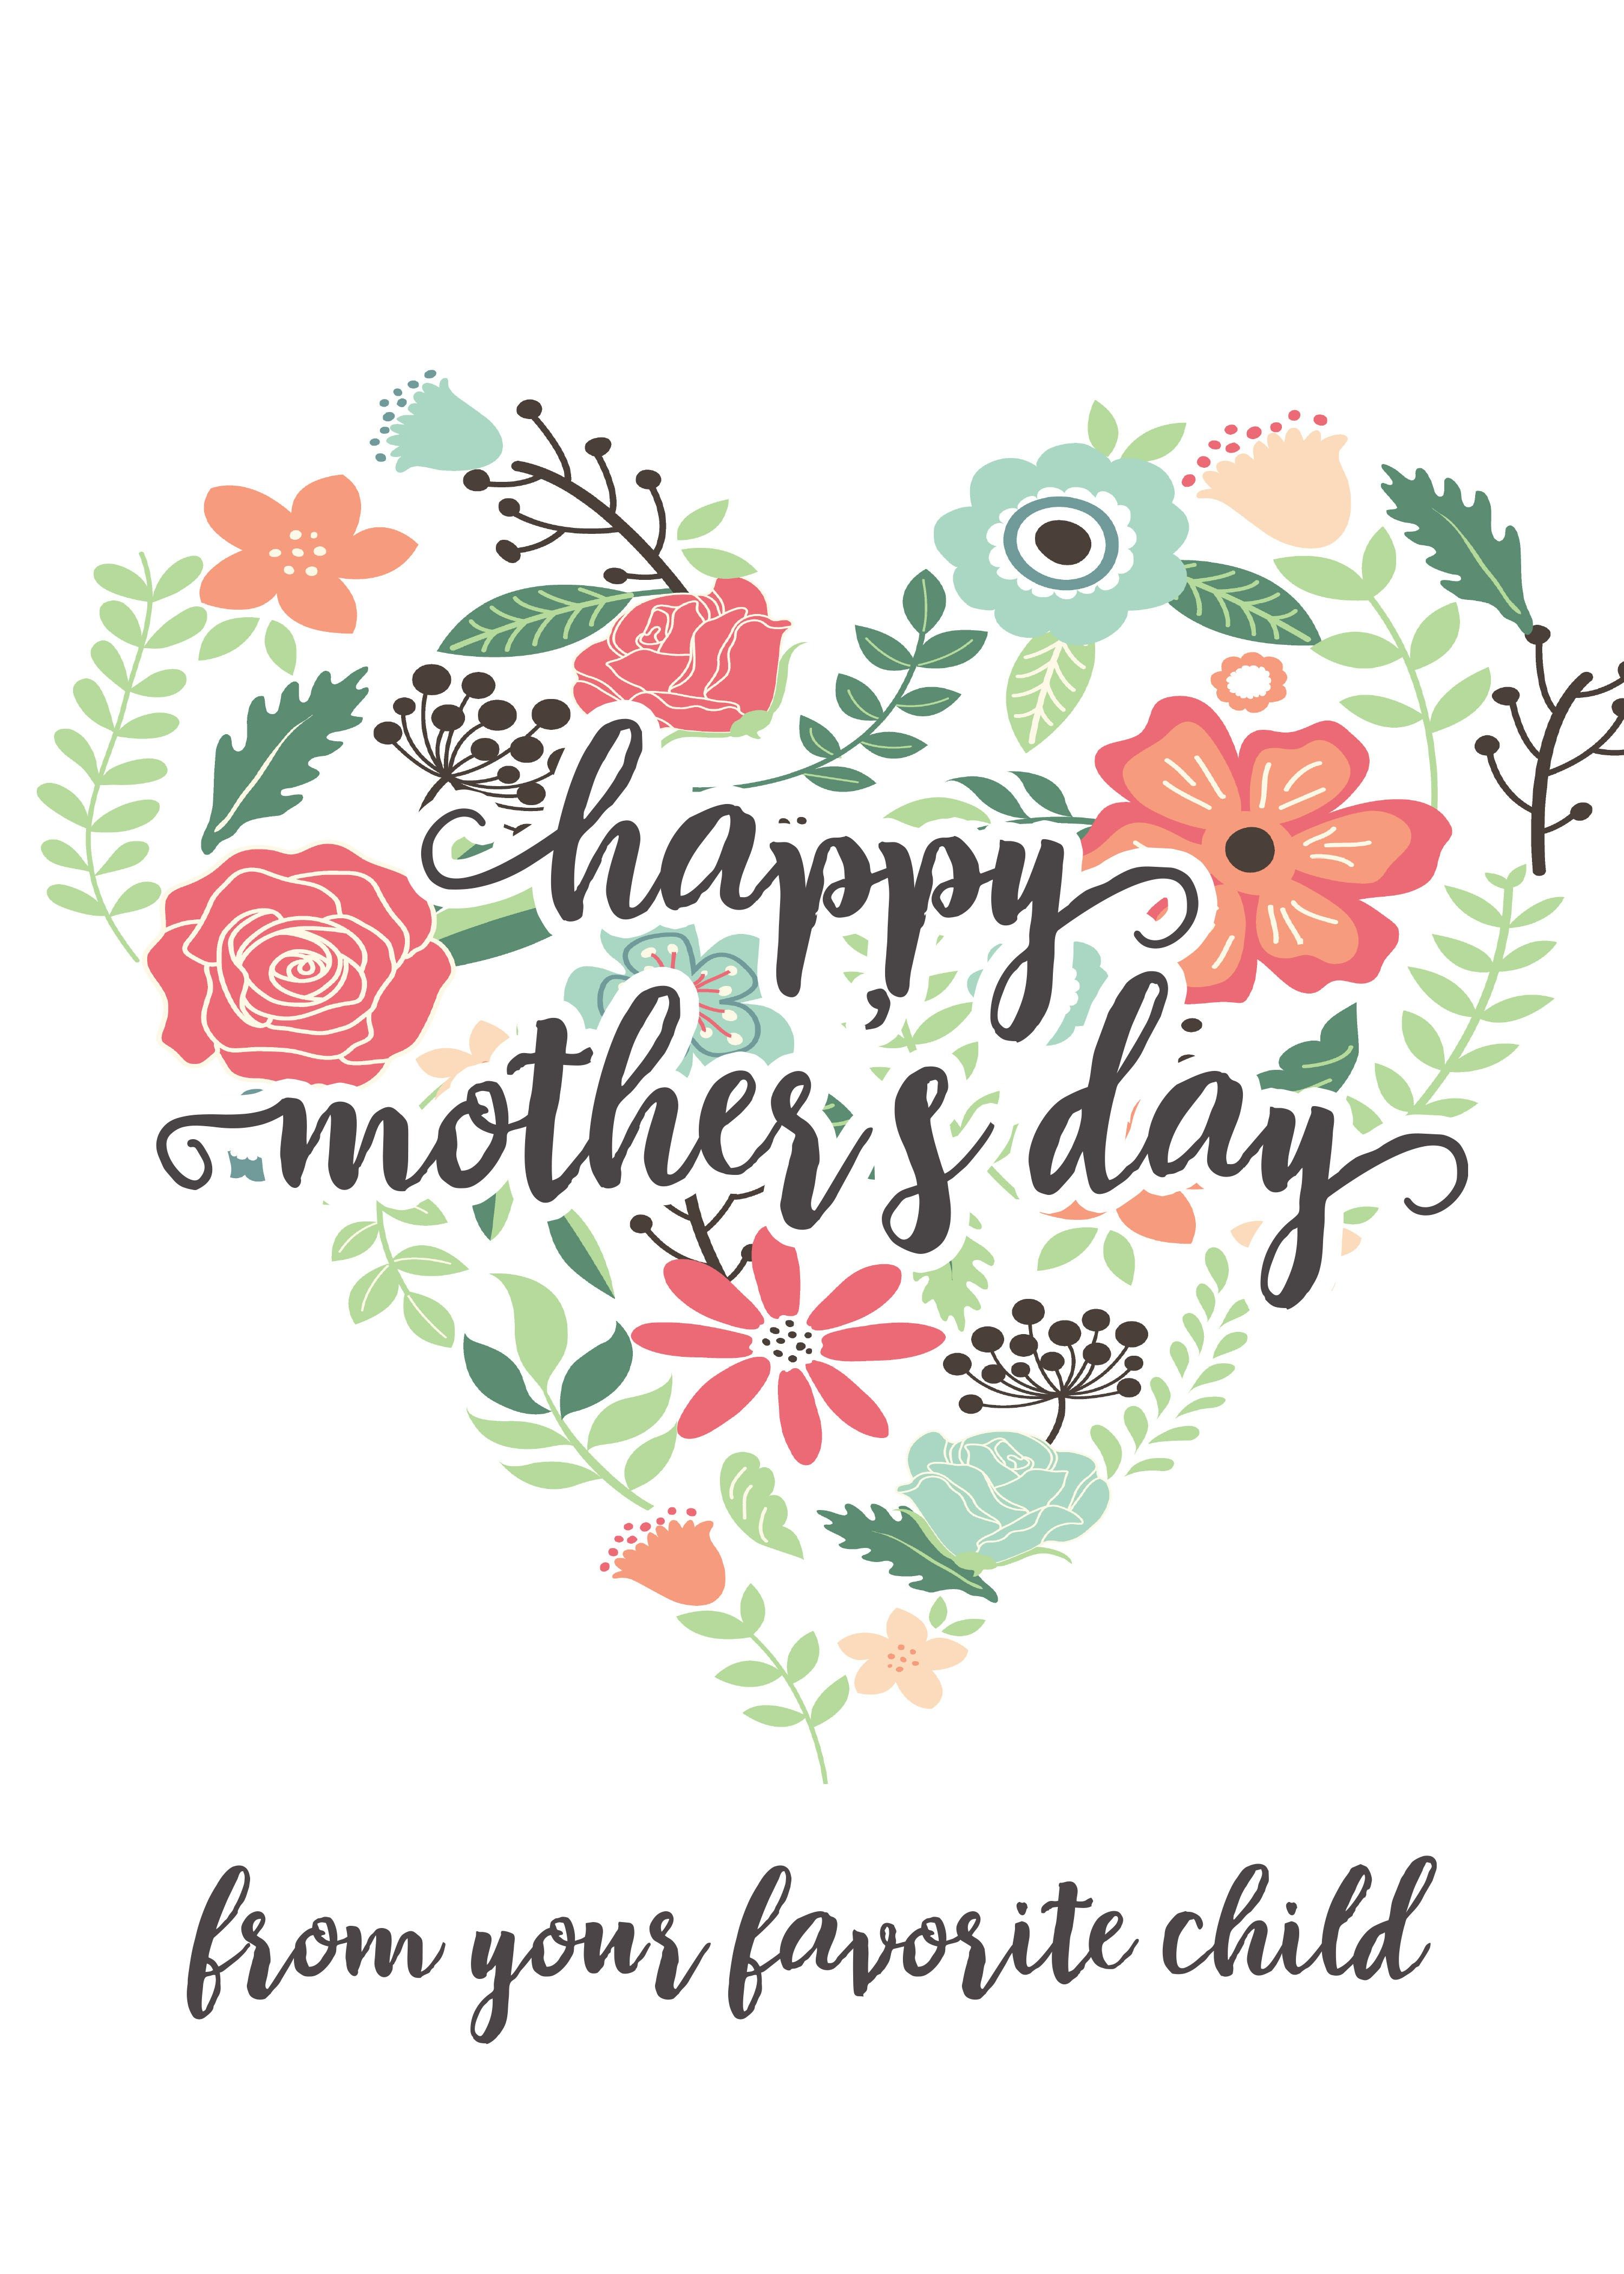 Happy Mothers Day Messages Free Printable Mothers Day Cards.